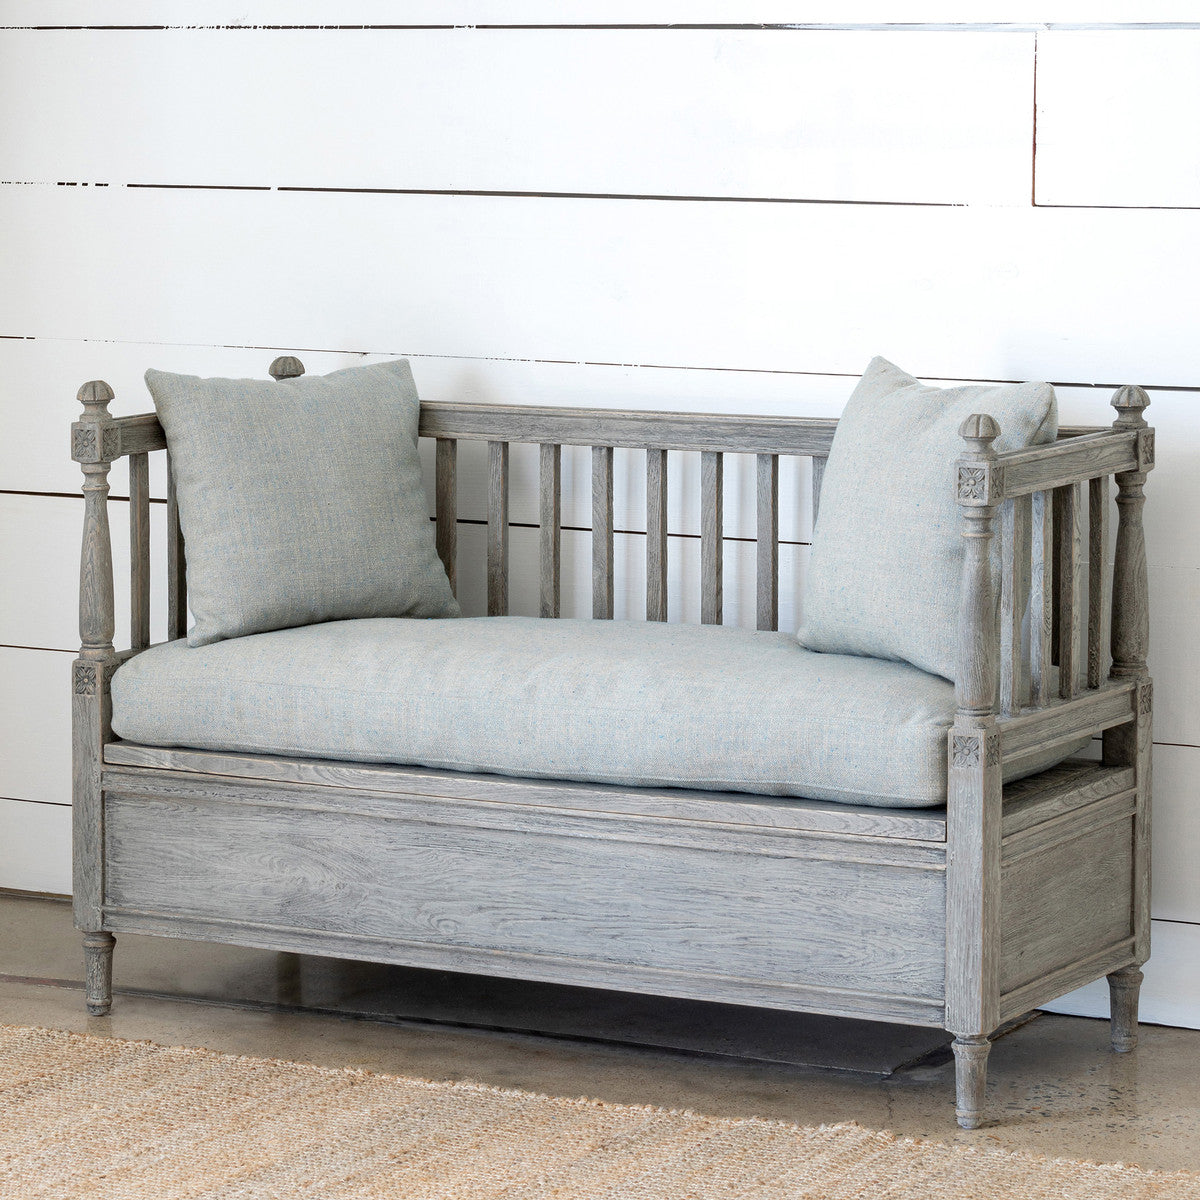 Foyer Bench With Storage Iron Accents